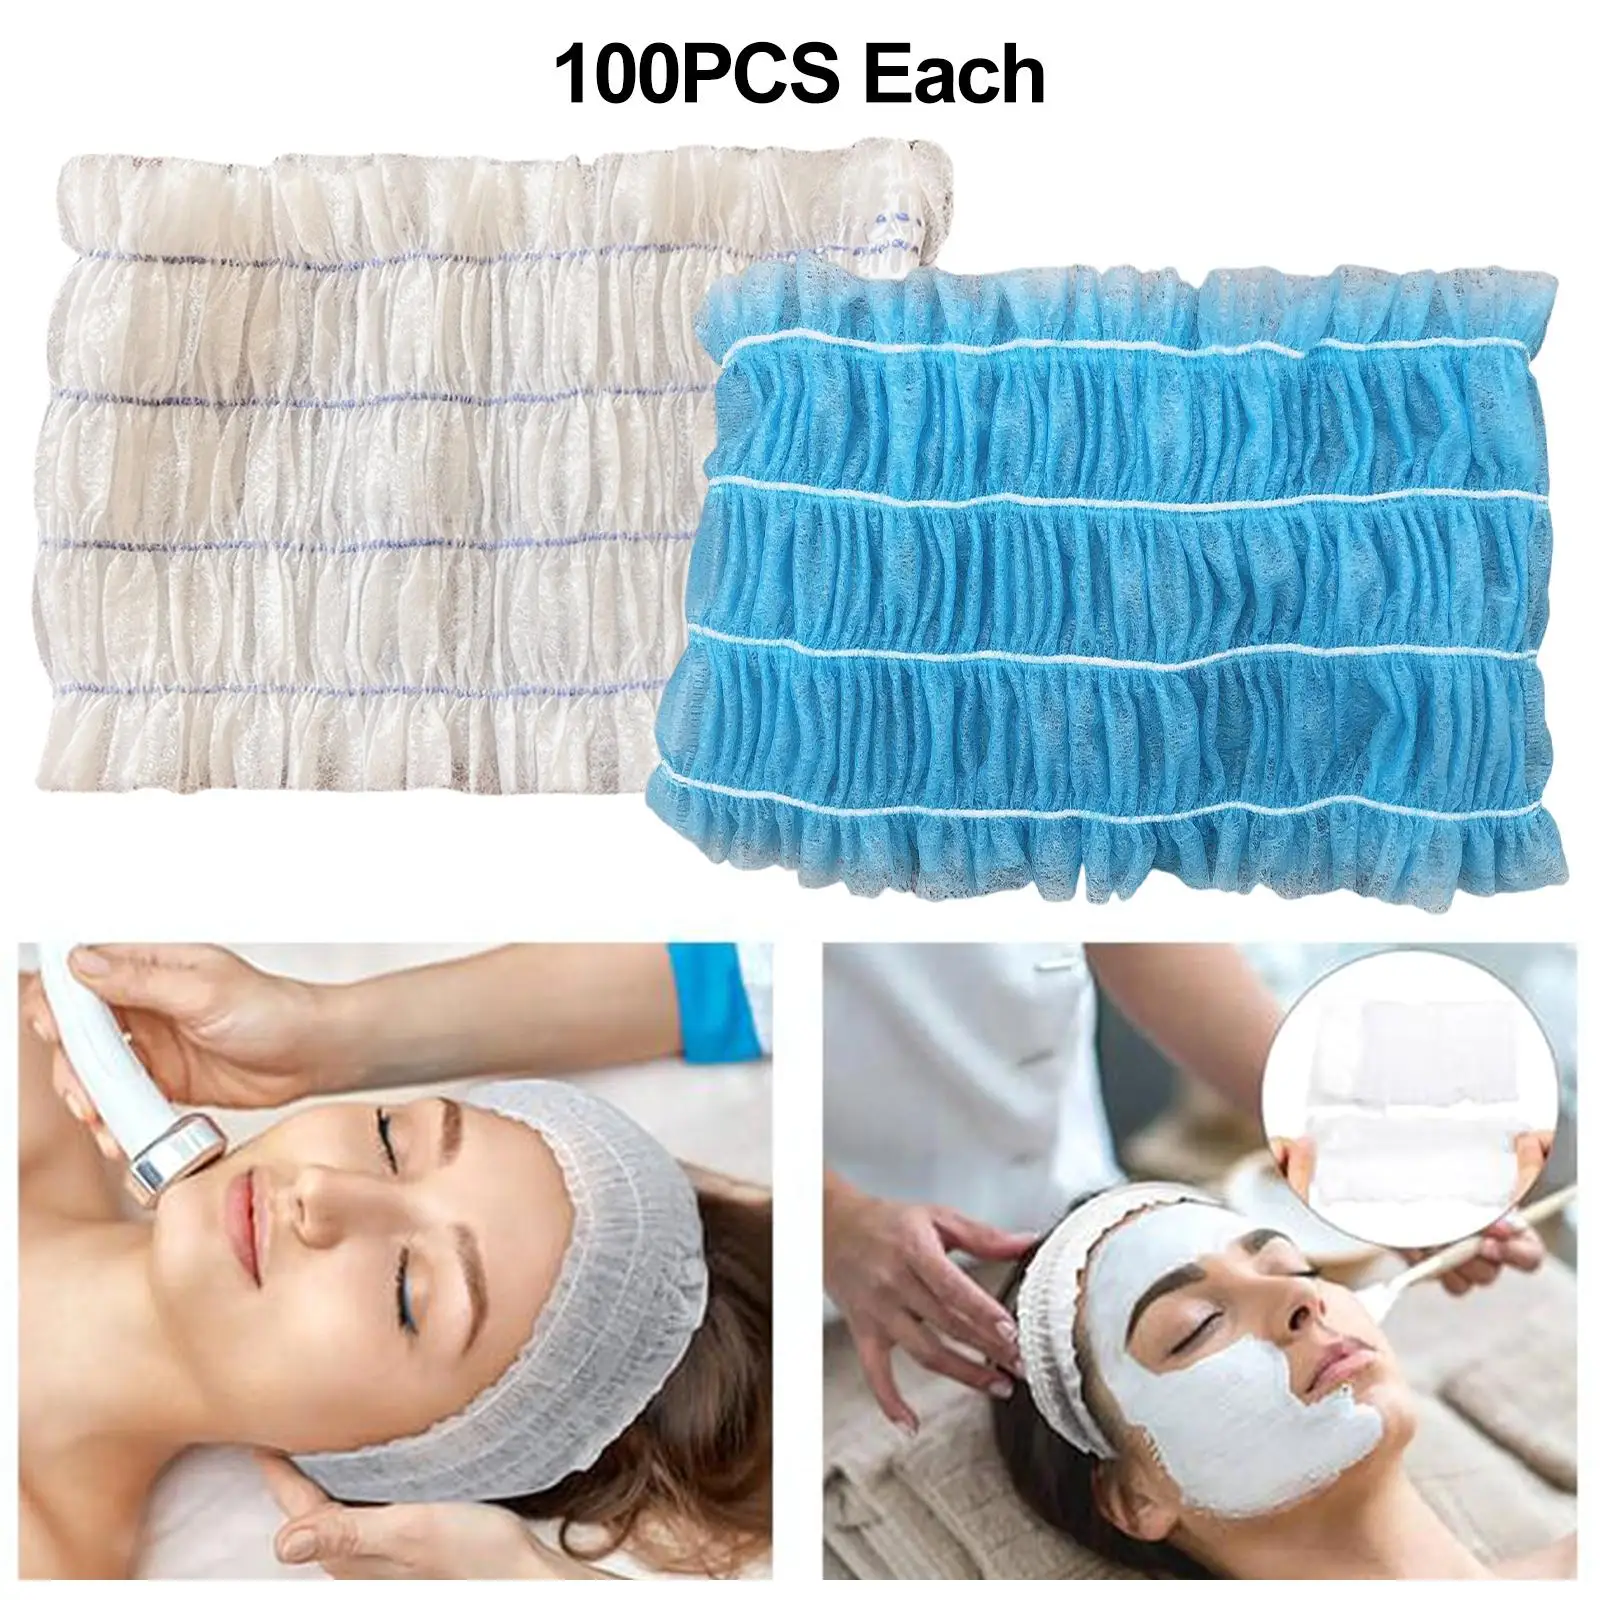 100x Disposable SPA Headbands Women Girls Non Woven Head Wraps for Tanning Skin Care